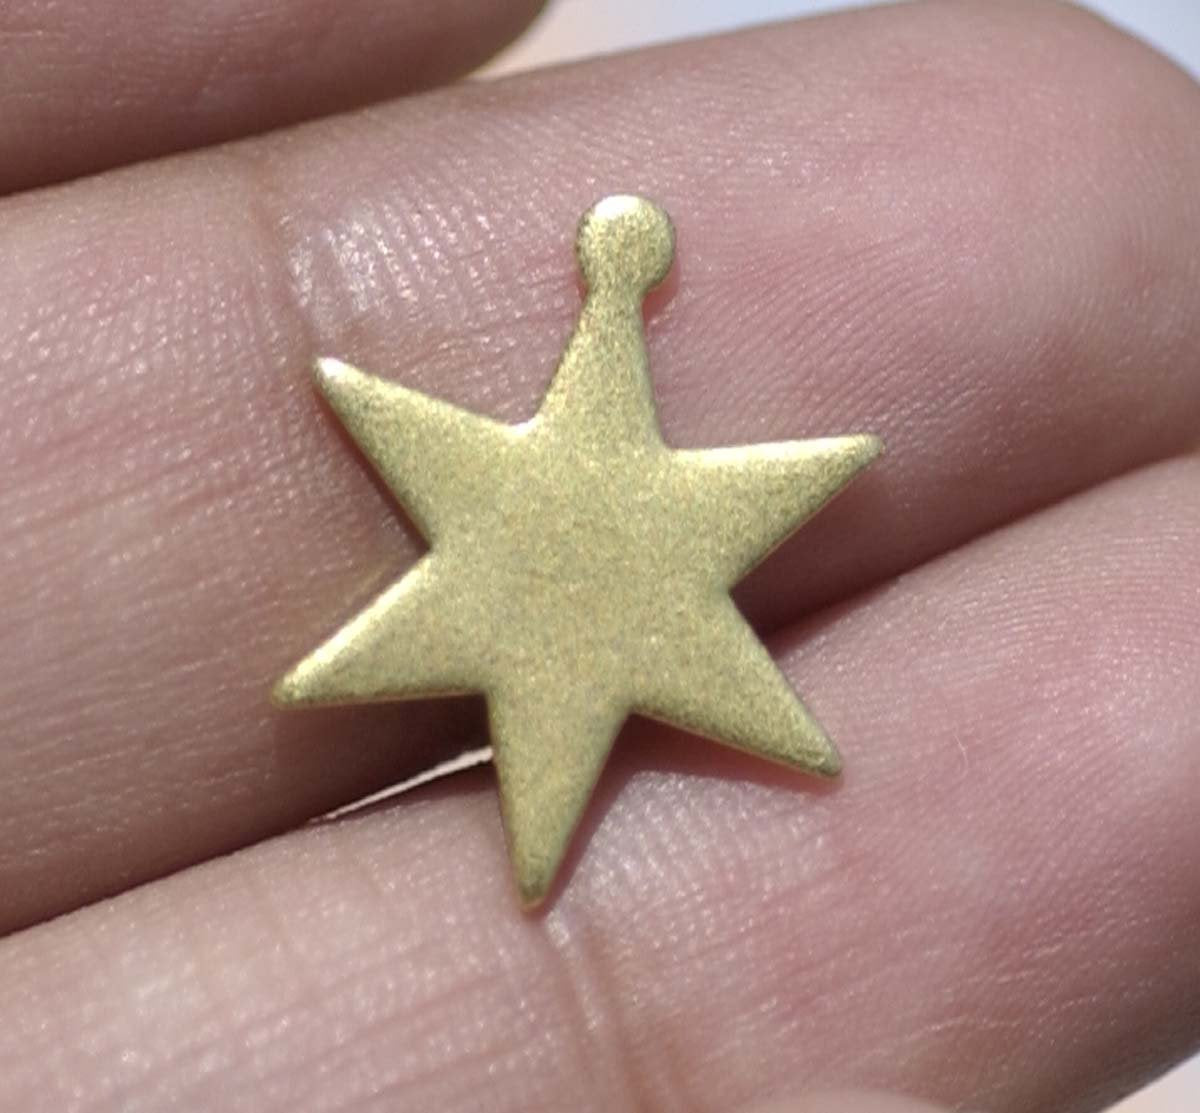 Brass Star Blank 17mm Cutout for Metalworking Stamping Texturing Blanks - 6 pieces